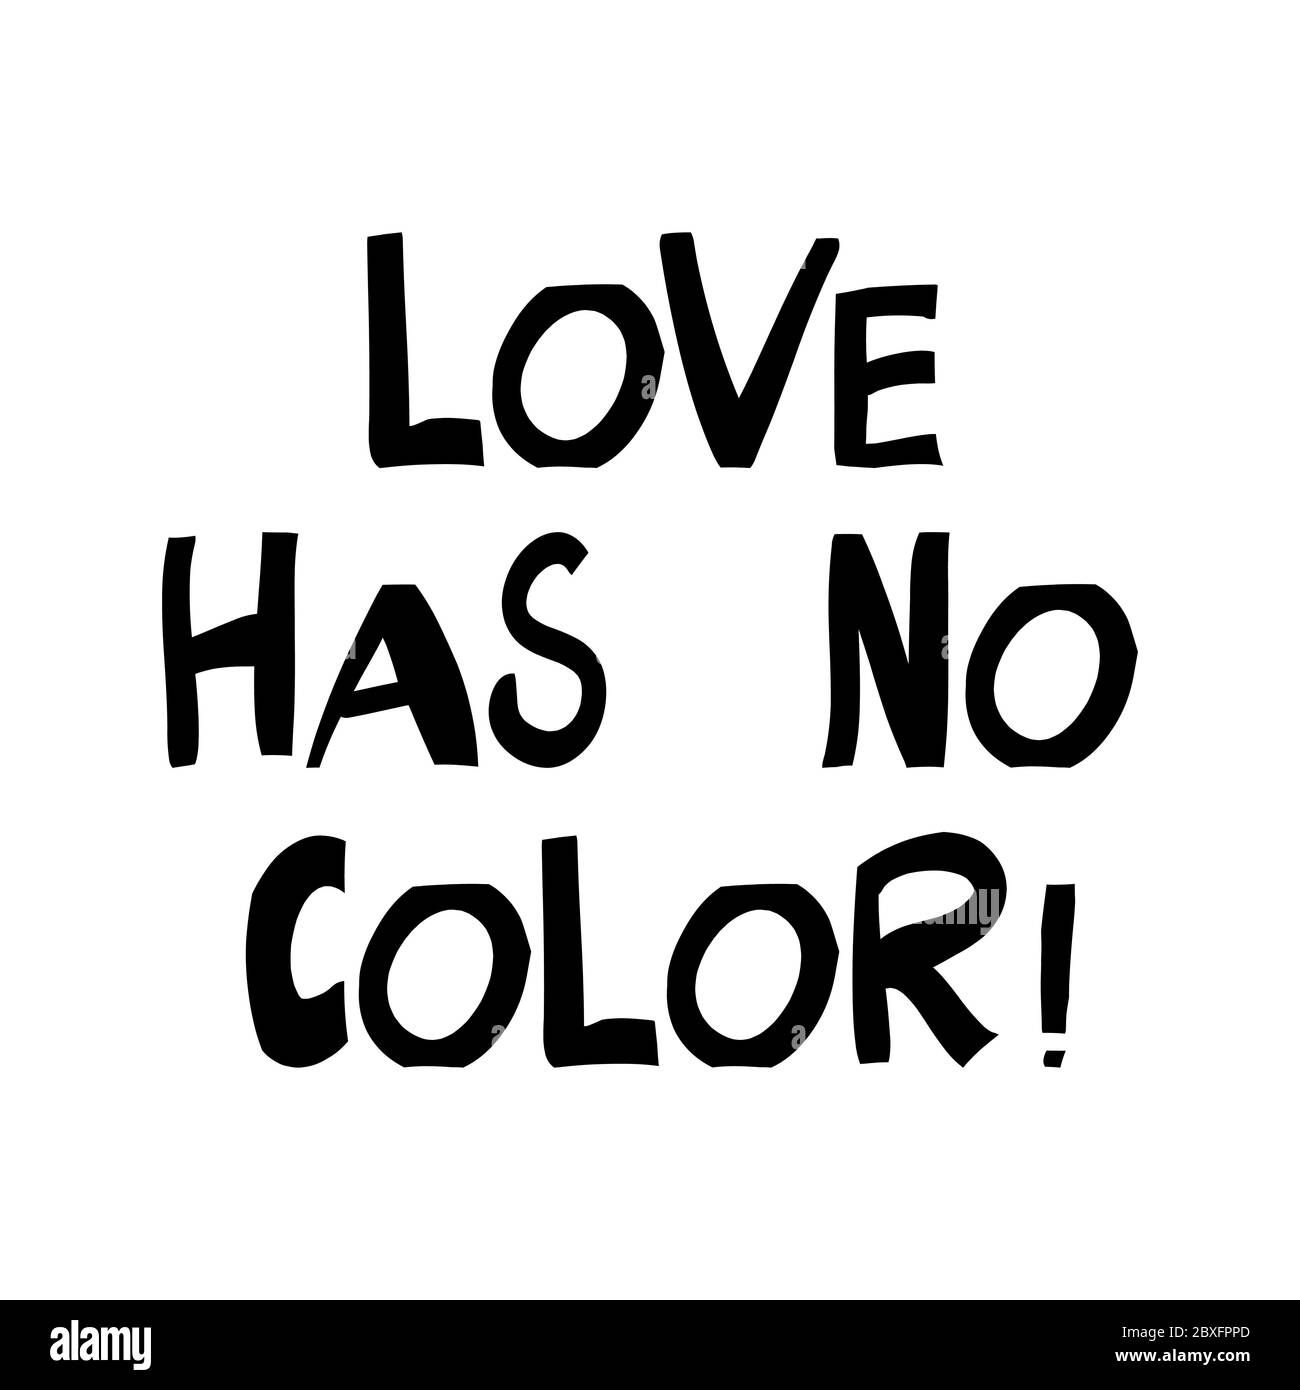 Love has no color. Quote about human rights. Lettering in modern scandinavian style. Isolated on white background. Vector stock illustration. Stock Vector